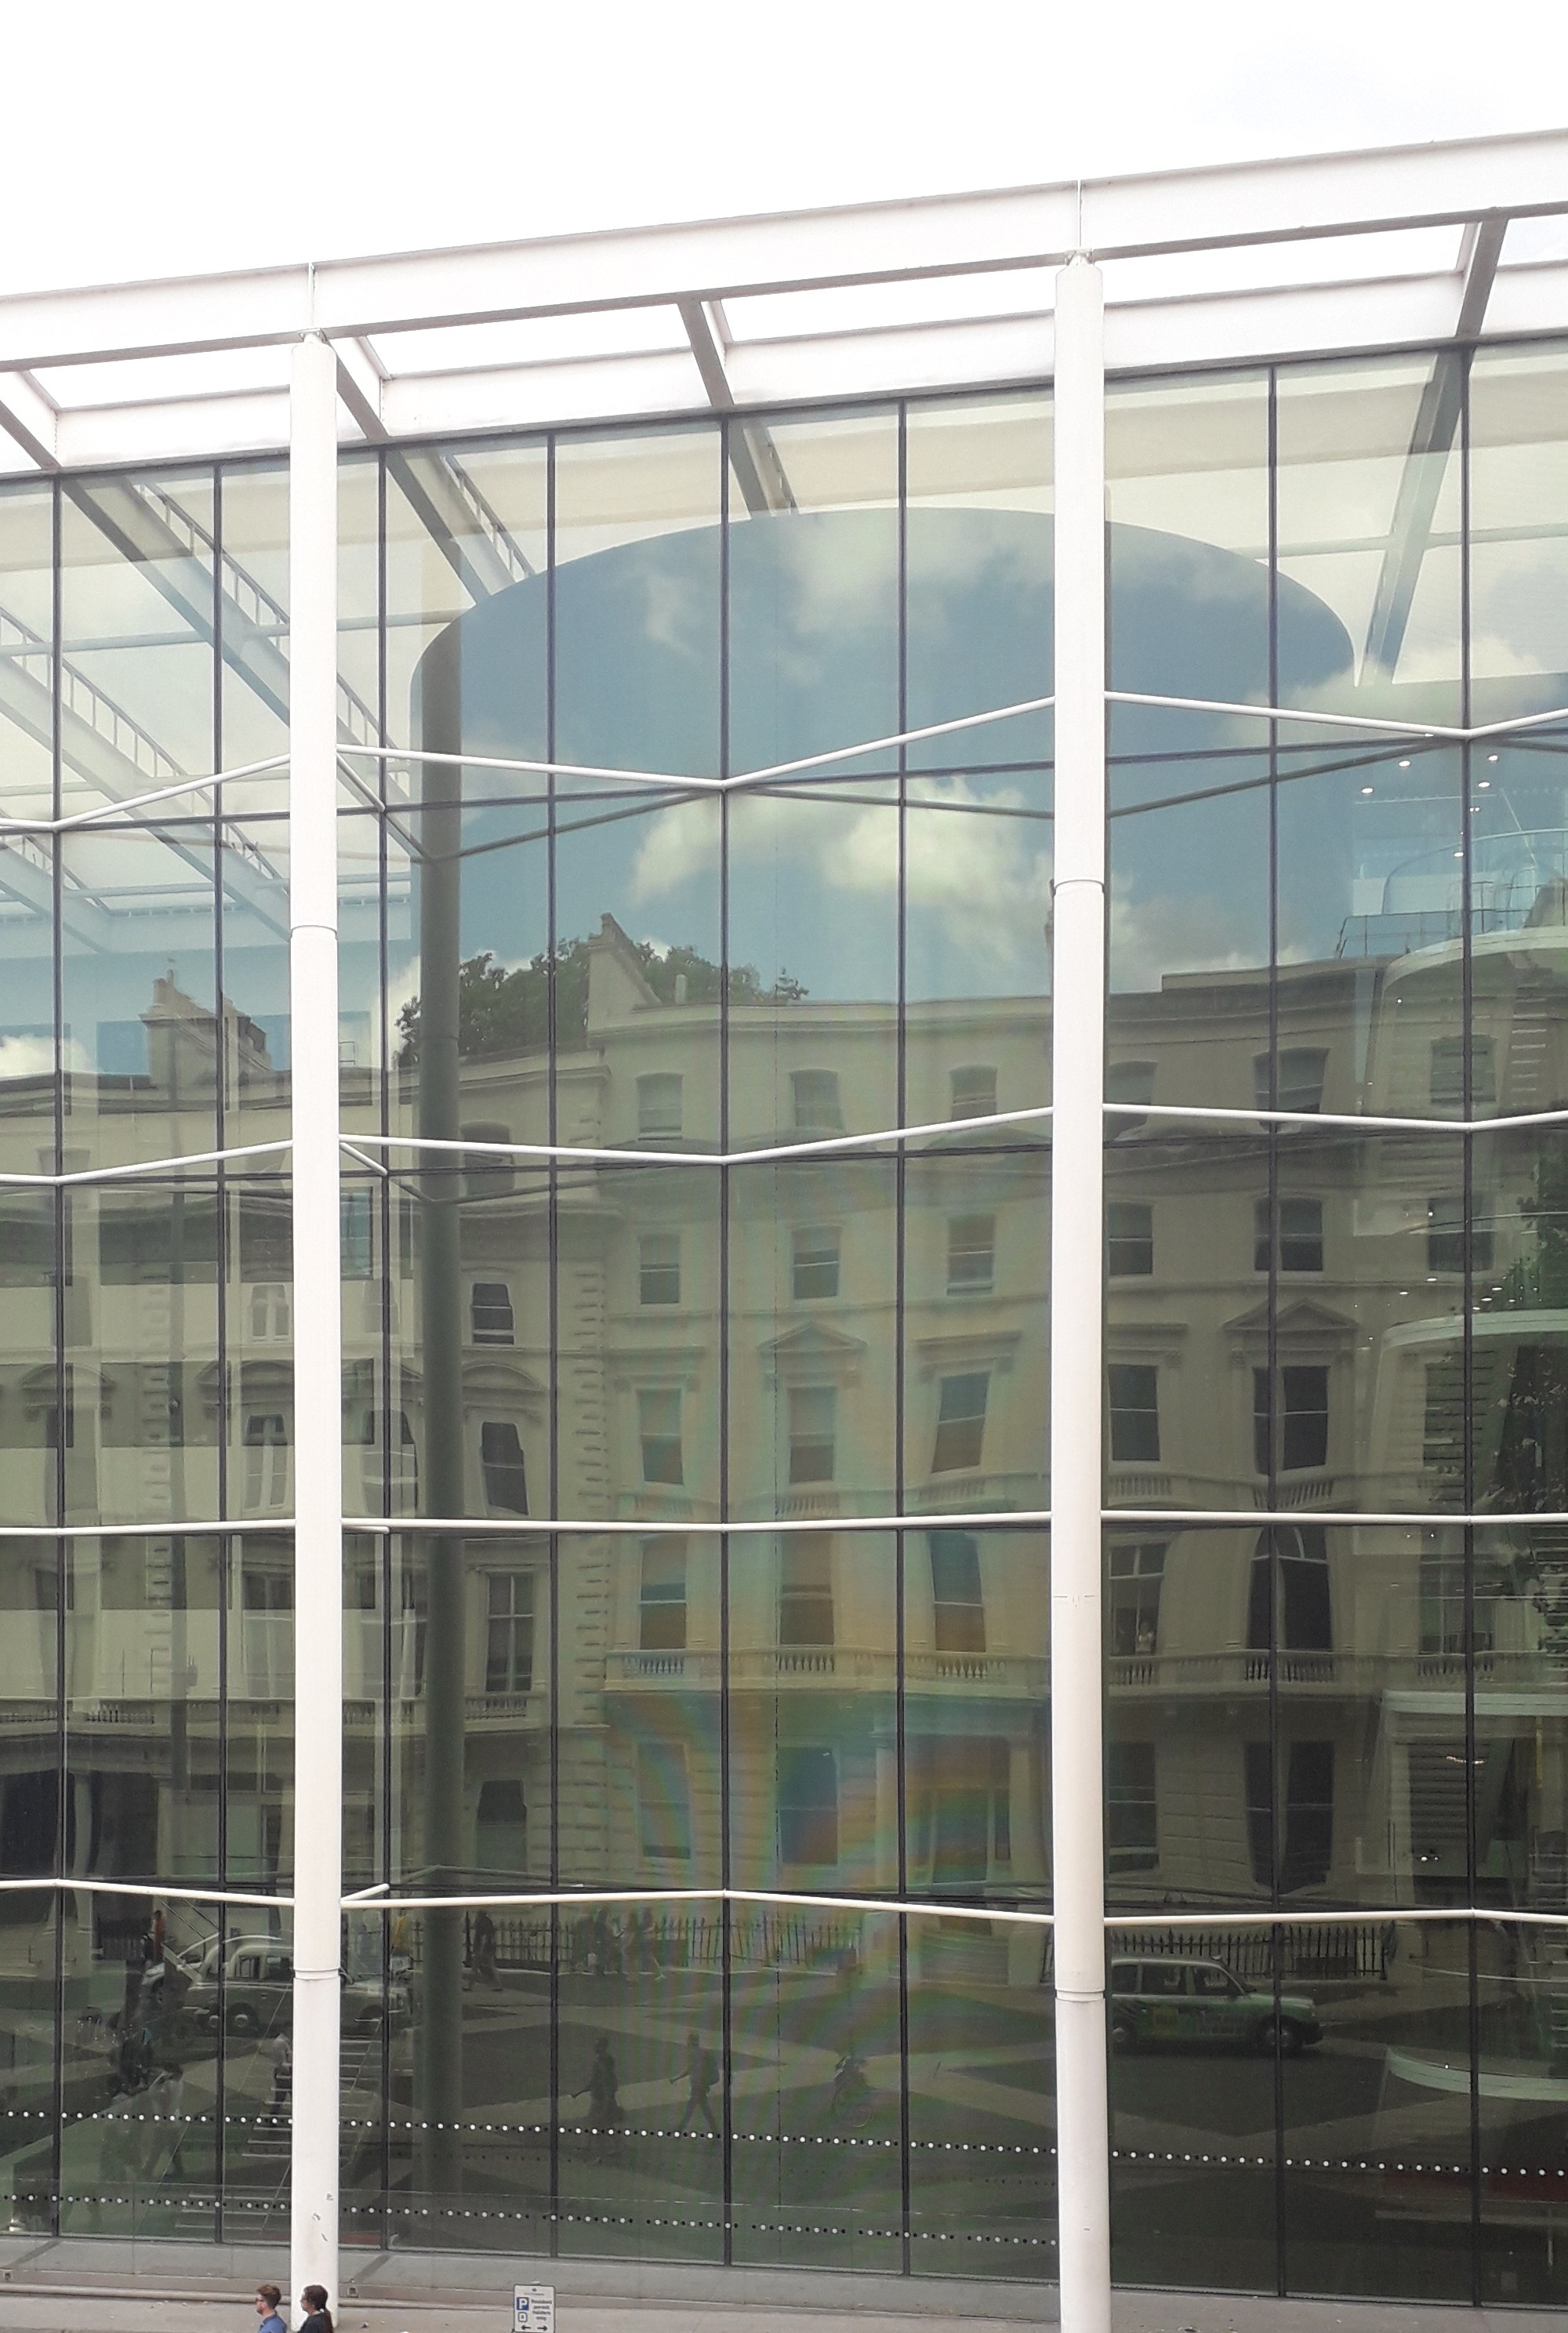 The Goethe Institut reflected in the windows of Imperial College over the road